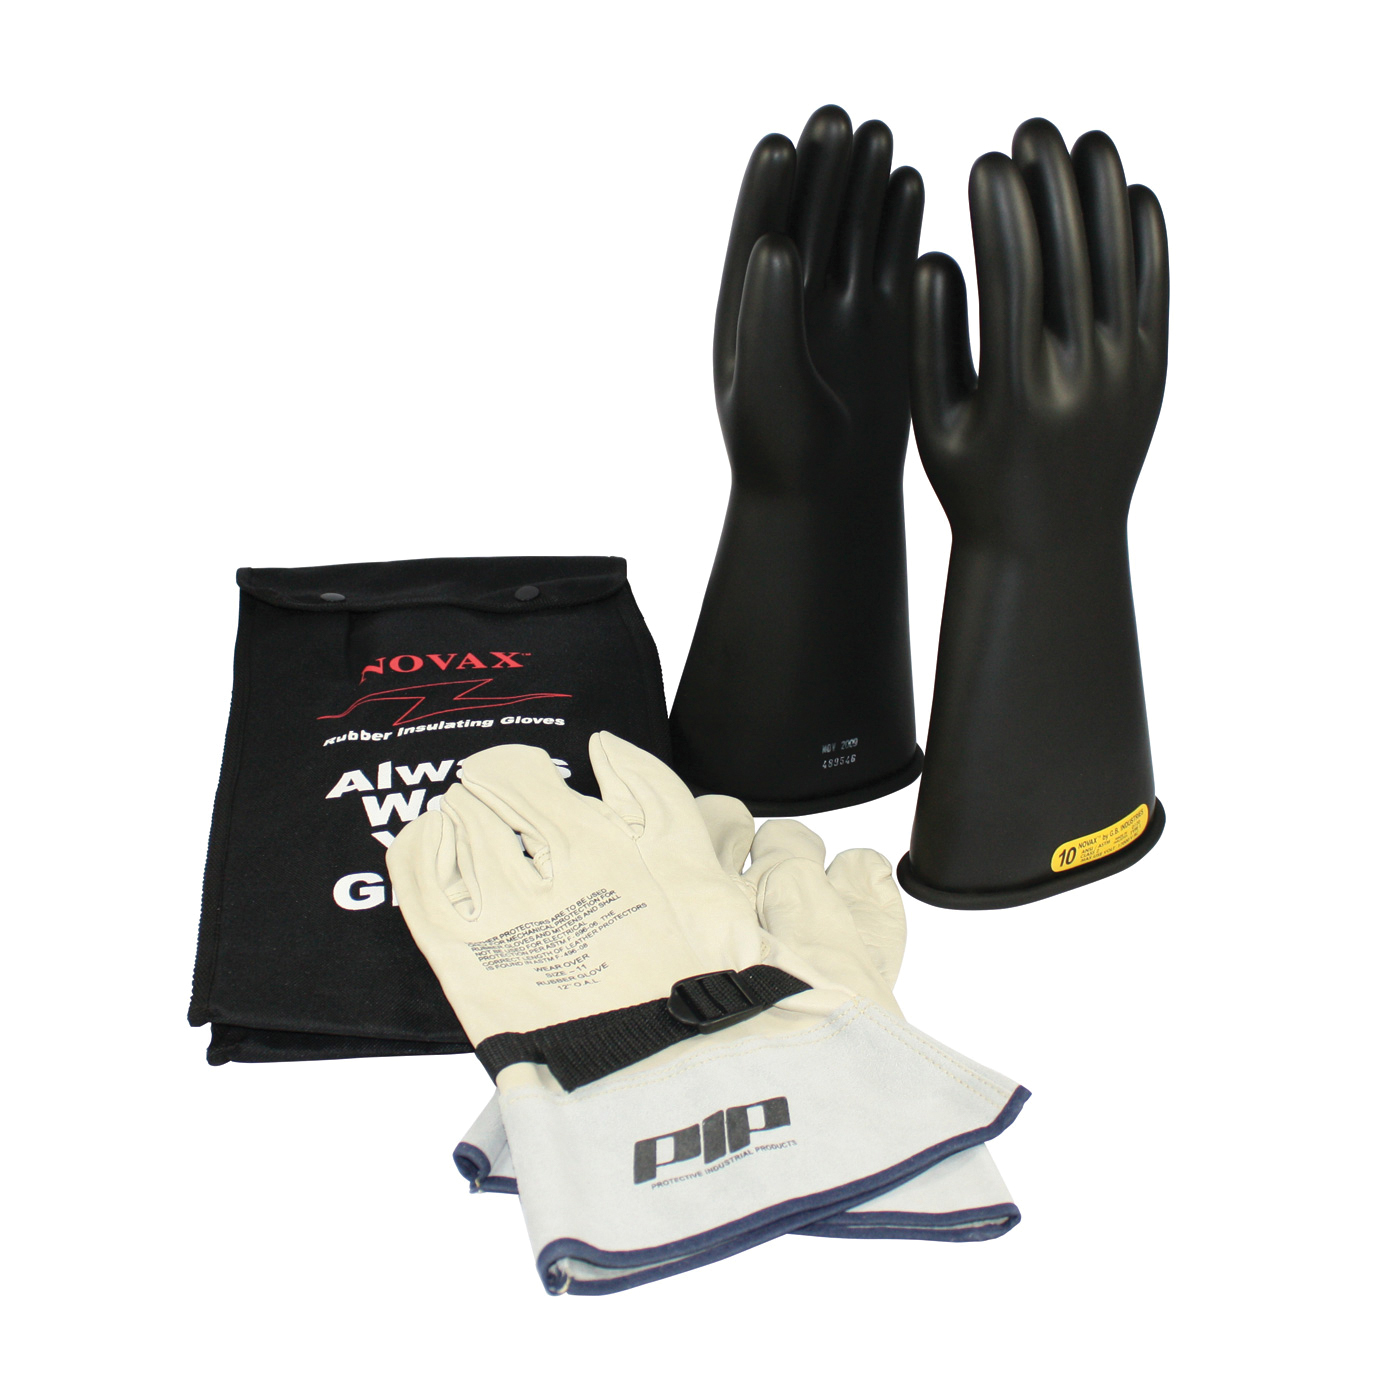 Novax® 150-SK-2/9-KIT Insulating Unisex Electrical Safety Gloves Kit, SZ 9, Cowhide Leather/Natural Rubber, Black/Natural, 14 in L, ASTM Class: Class 2, 17000 VAC, 25500 VDC Max Use Voltage